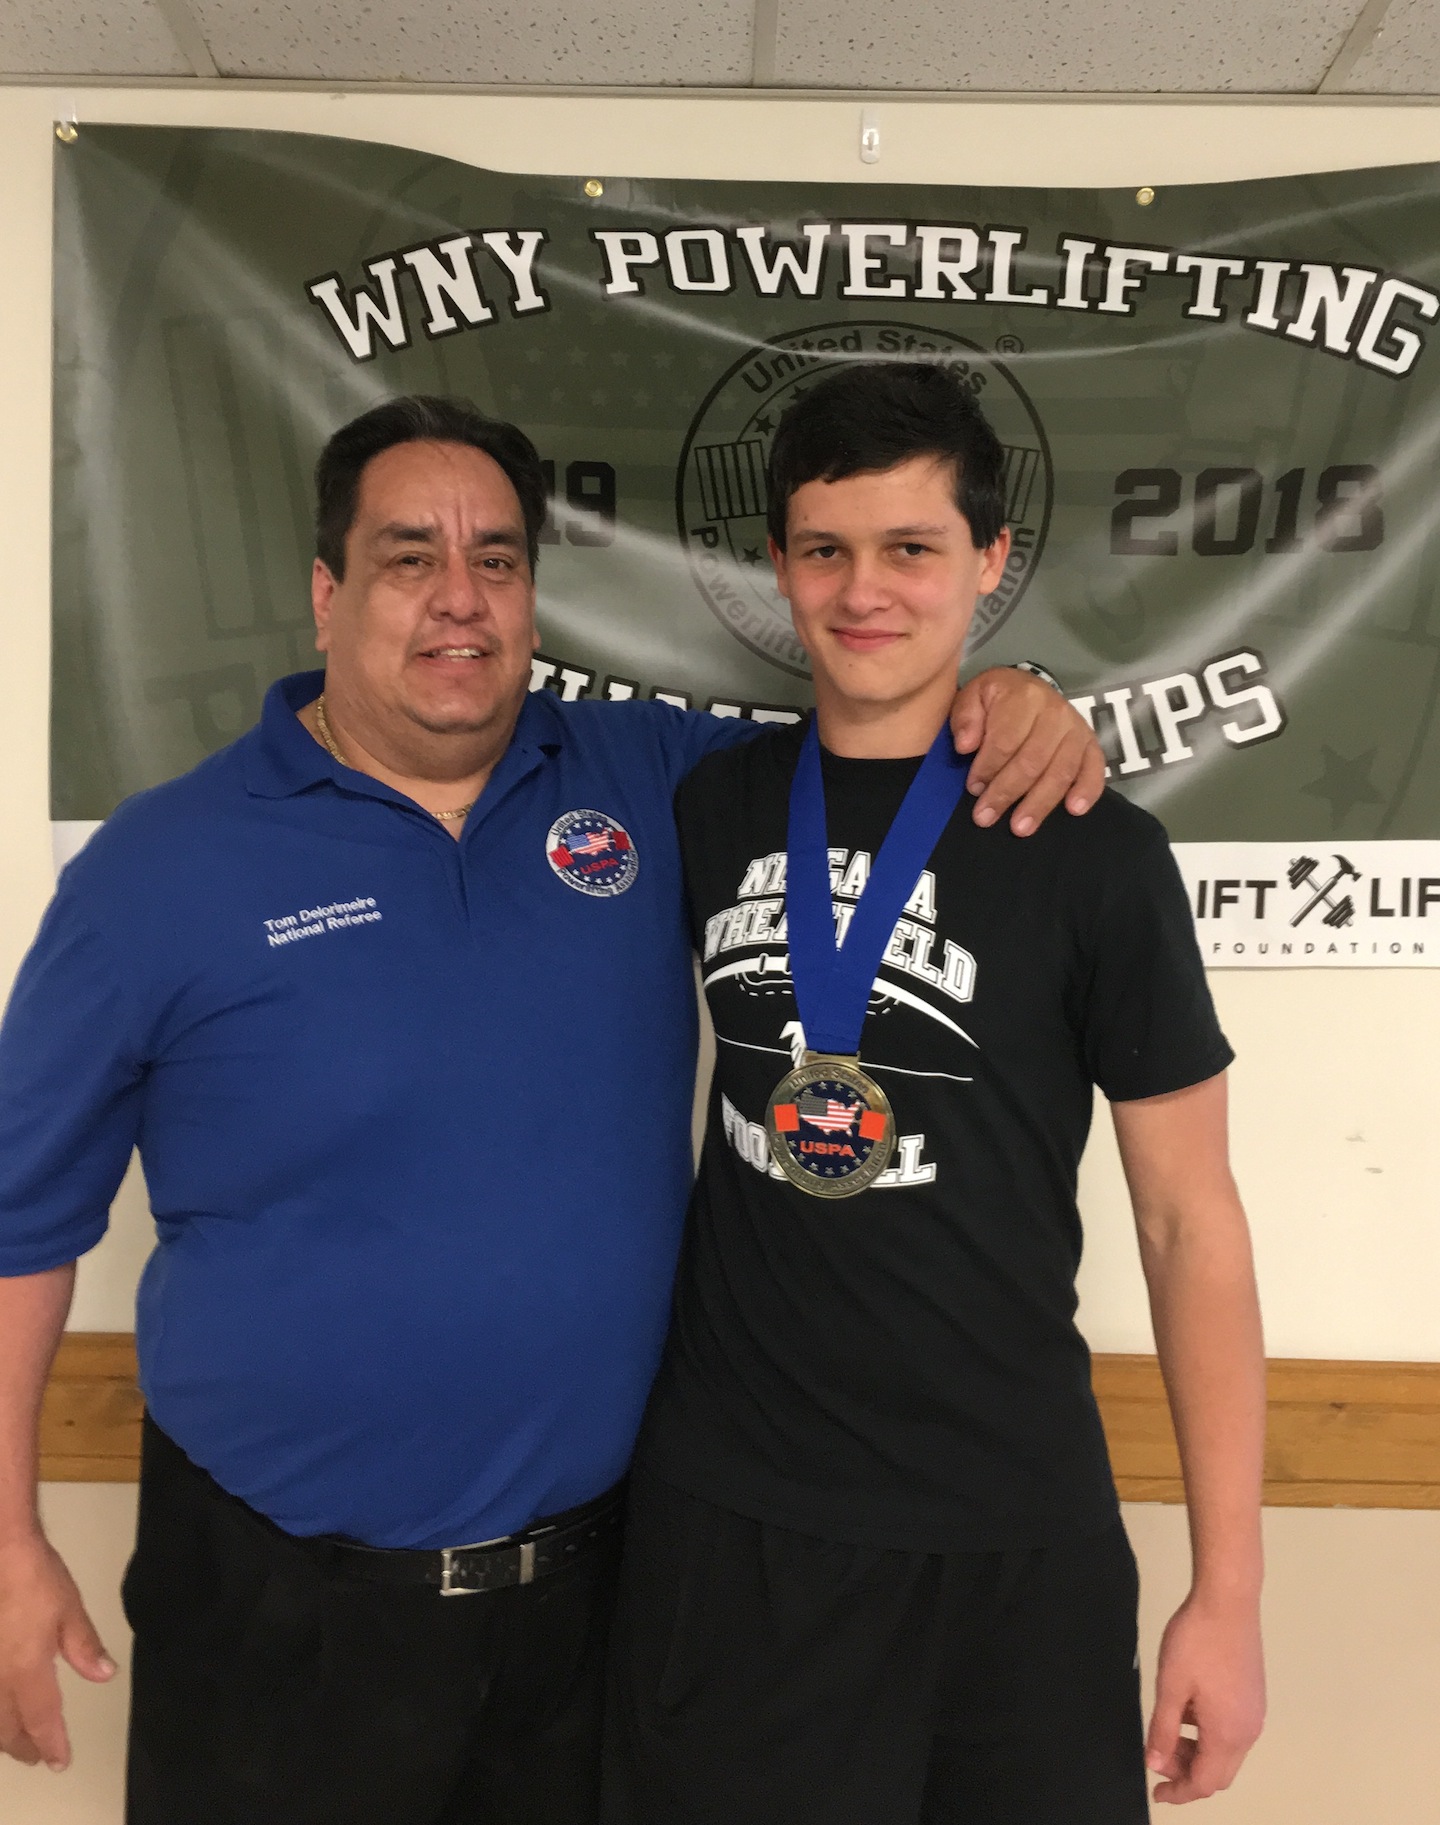 Pictured, from left, Tom Delorimiere and powerlifting champion Cole Janowsky.